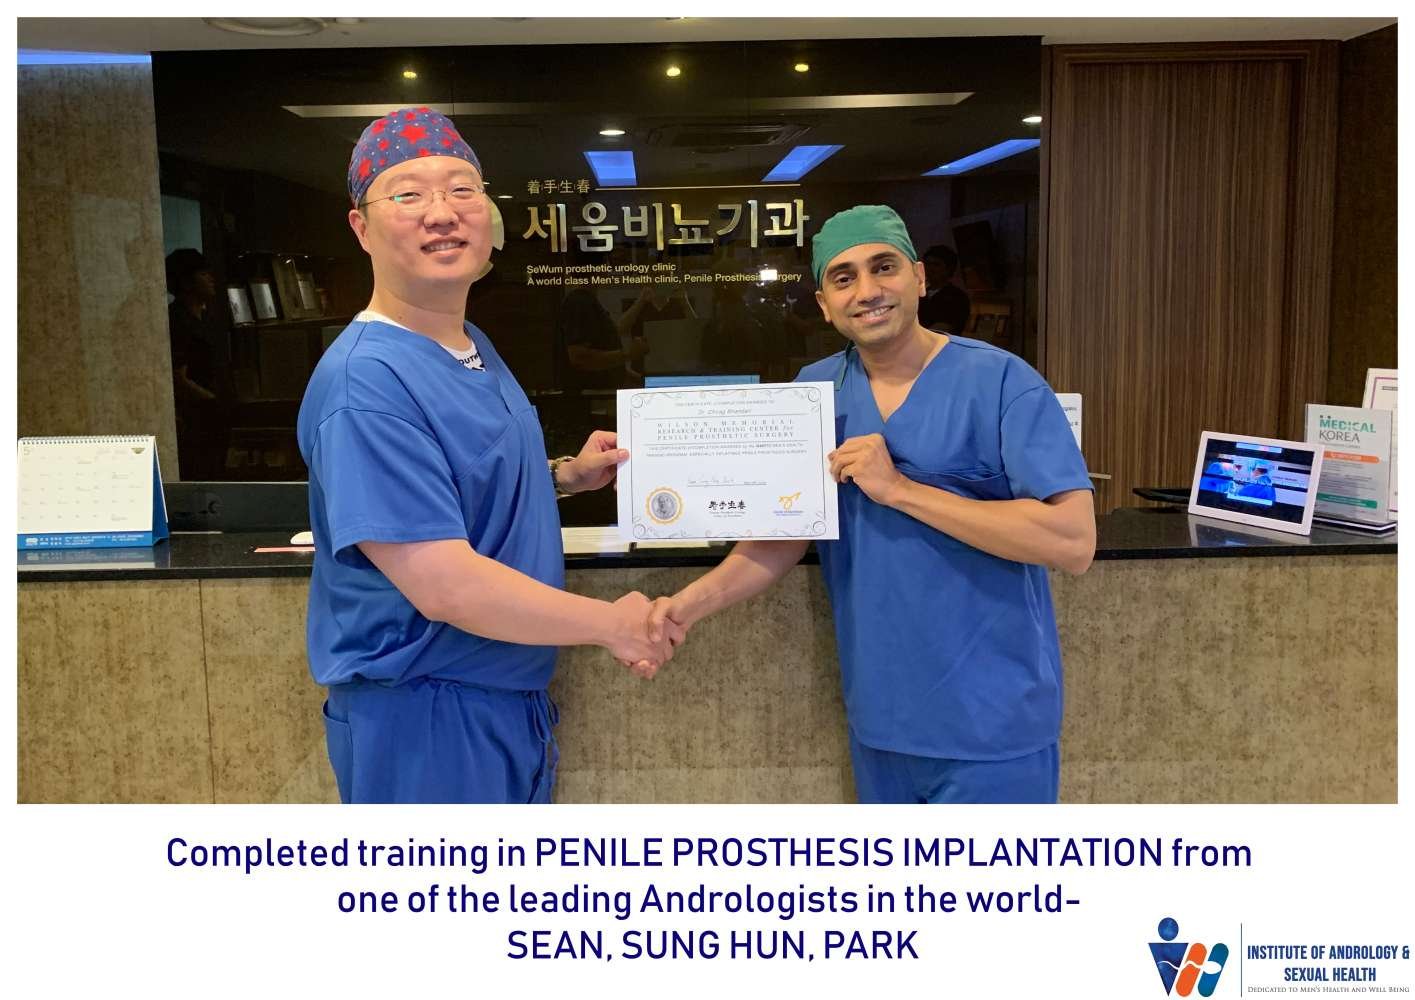 Completed training in Penile Prosthesis Implantation from Sean, Sung Hun, Park